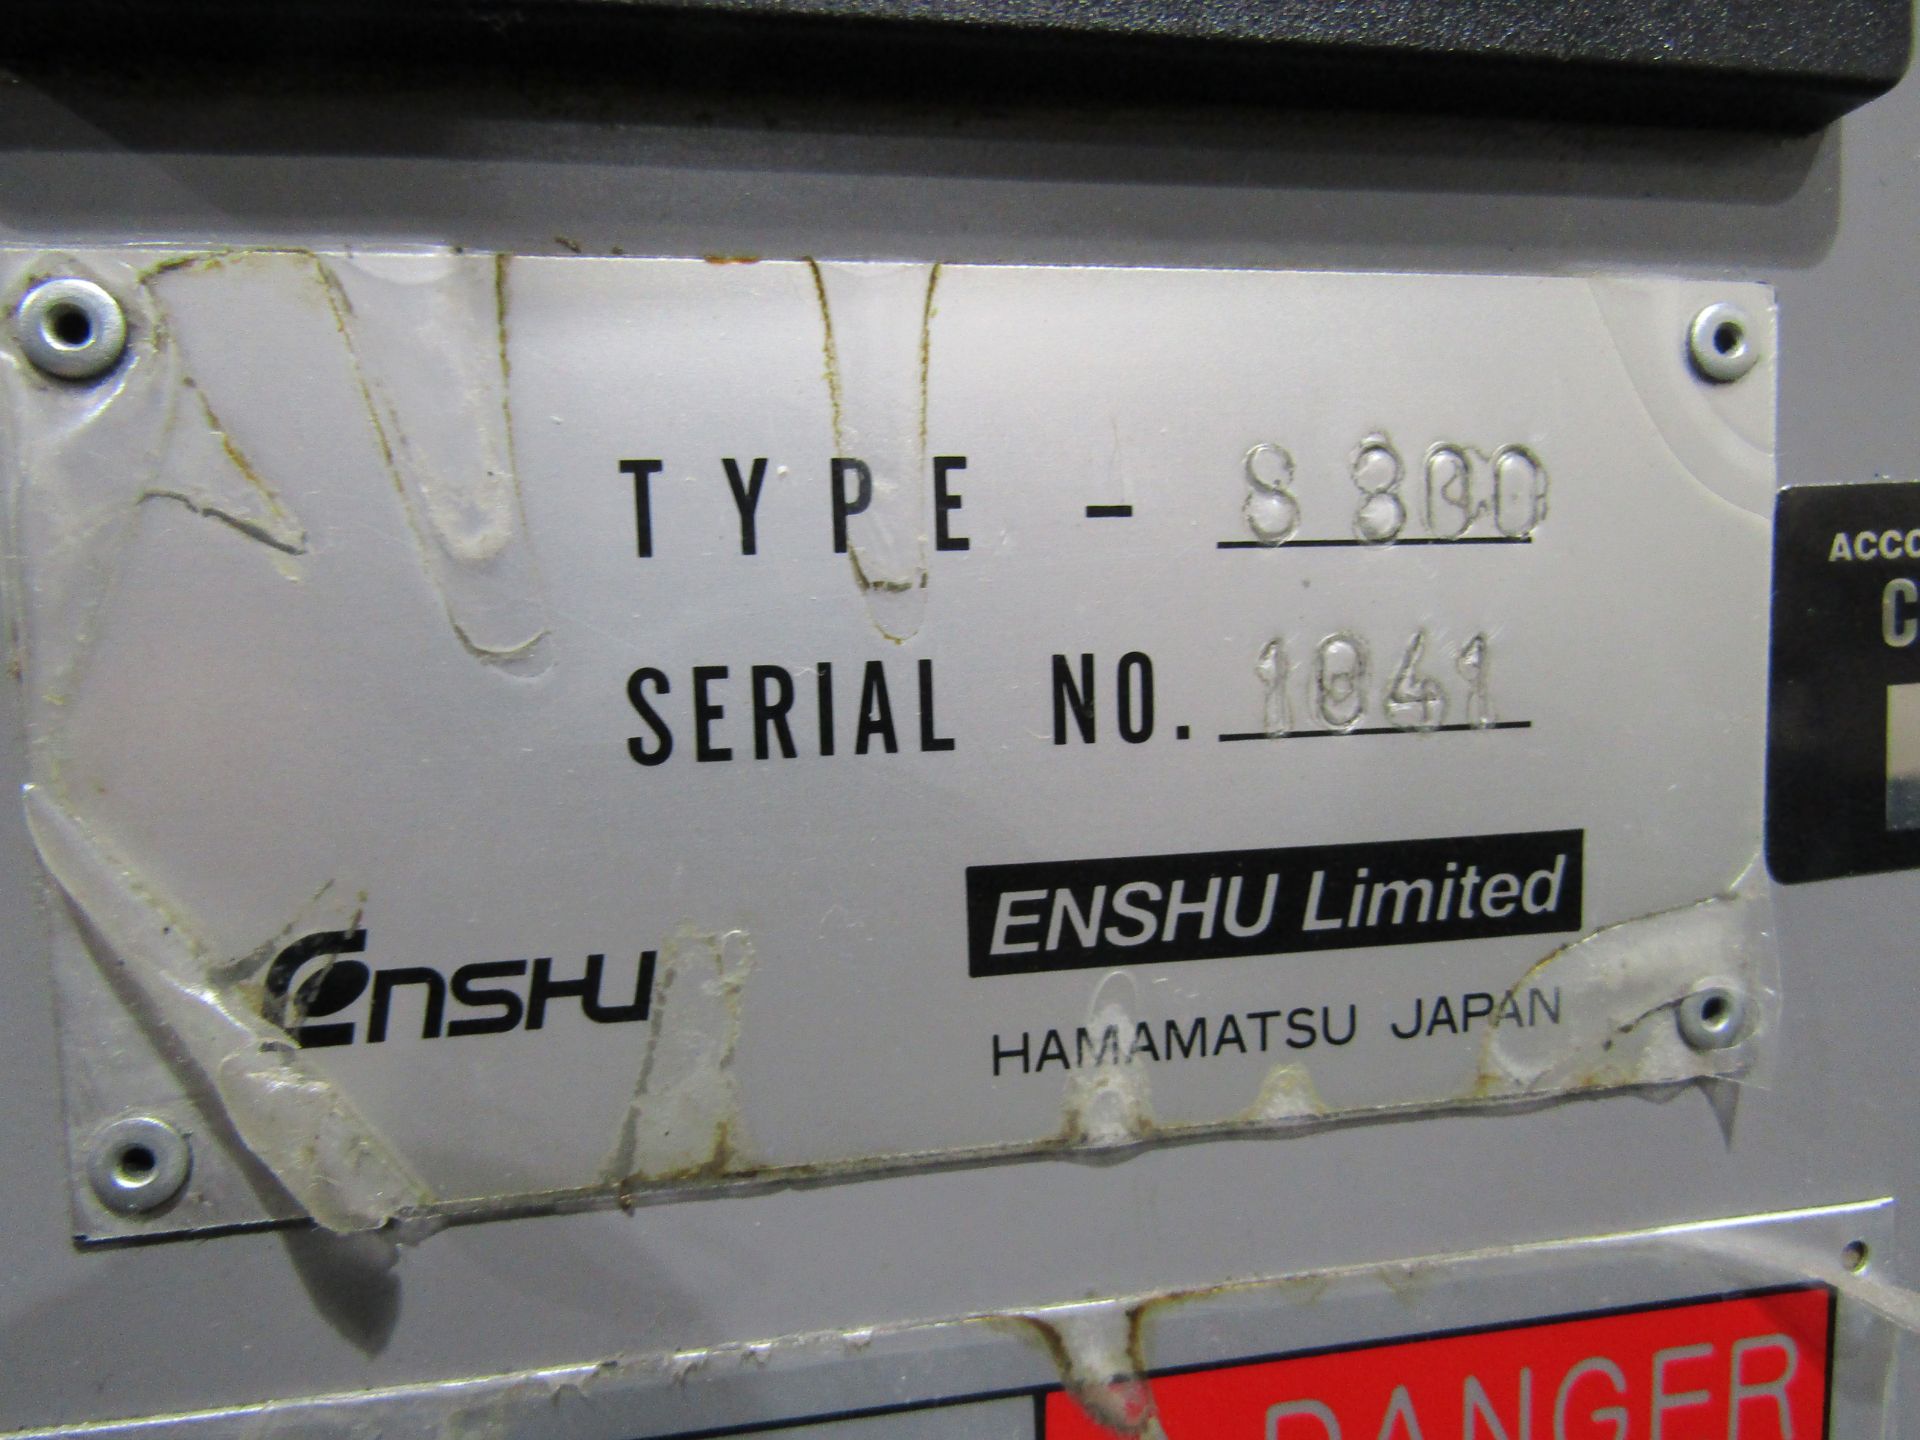 ENSHU CNC MILL VERTICAL MACHINING CENTER, MODEL S300, SERIAL 1041, MANUFACTURED 1996, ENAC SYSTEM - Image 7 of 8